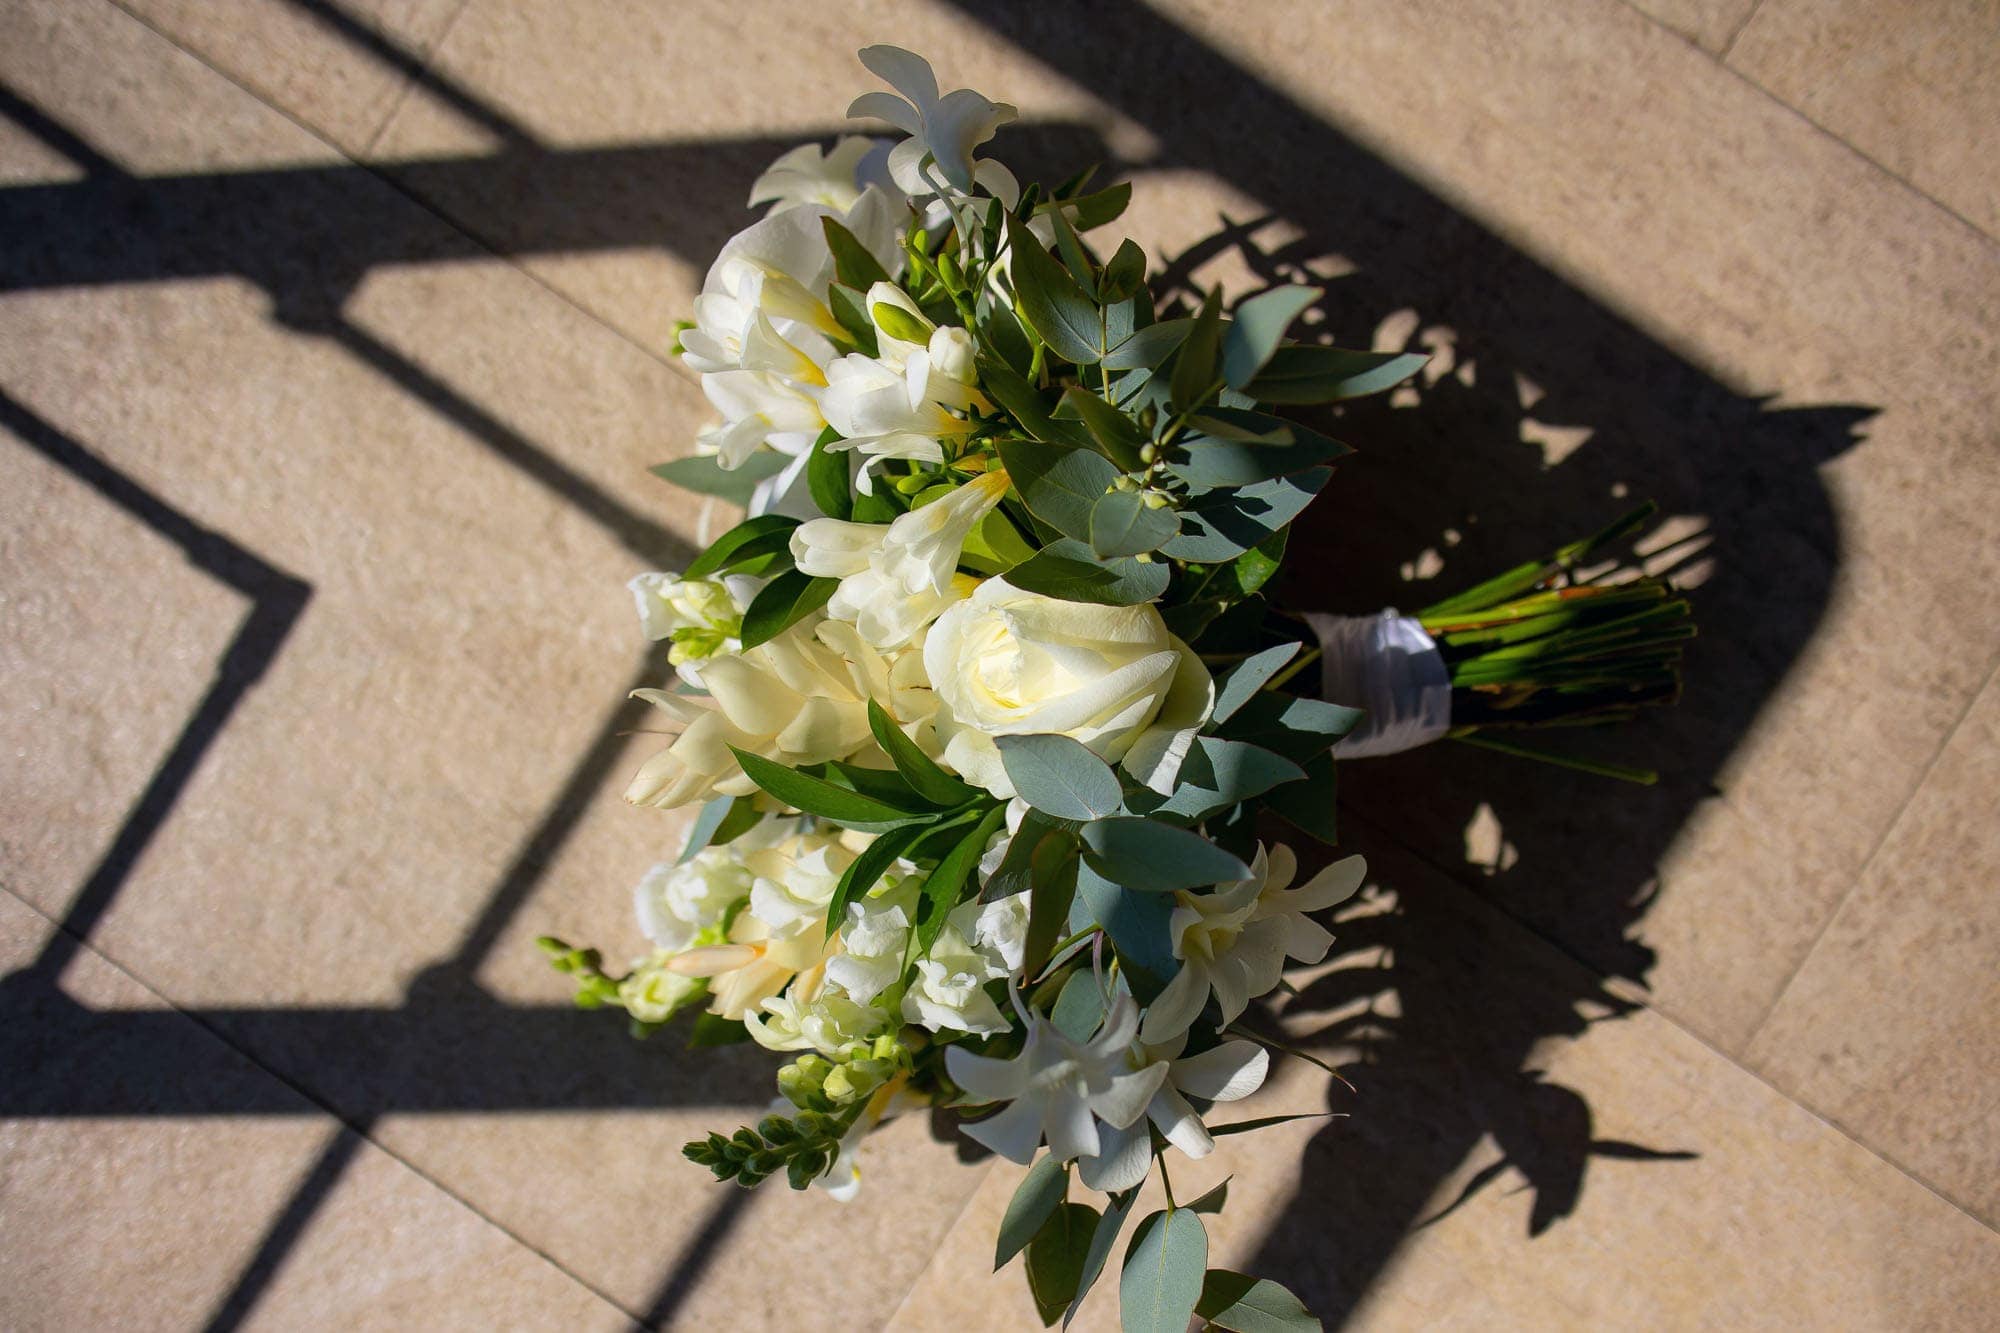 Creative shot of the flower bouquet with shadows.